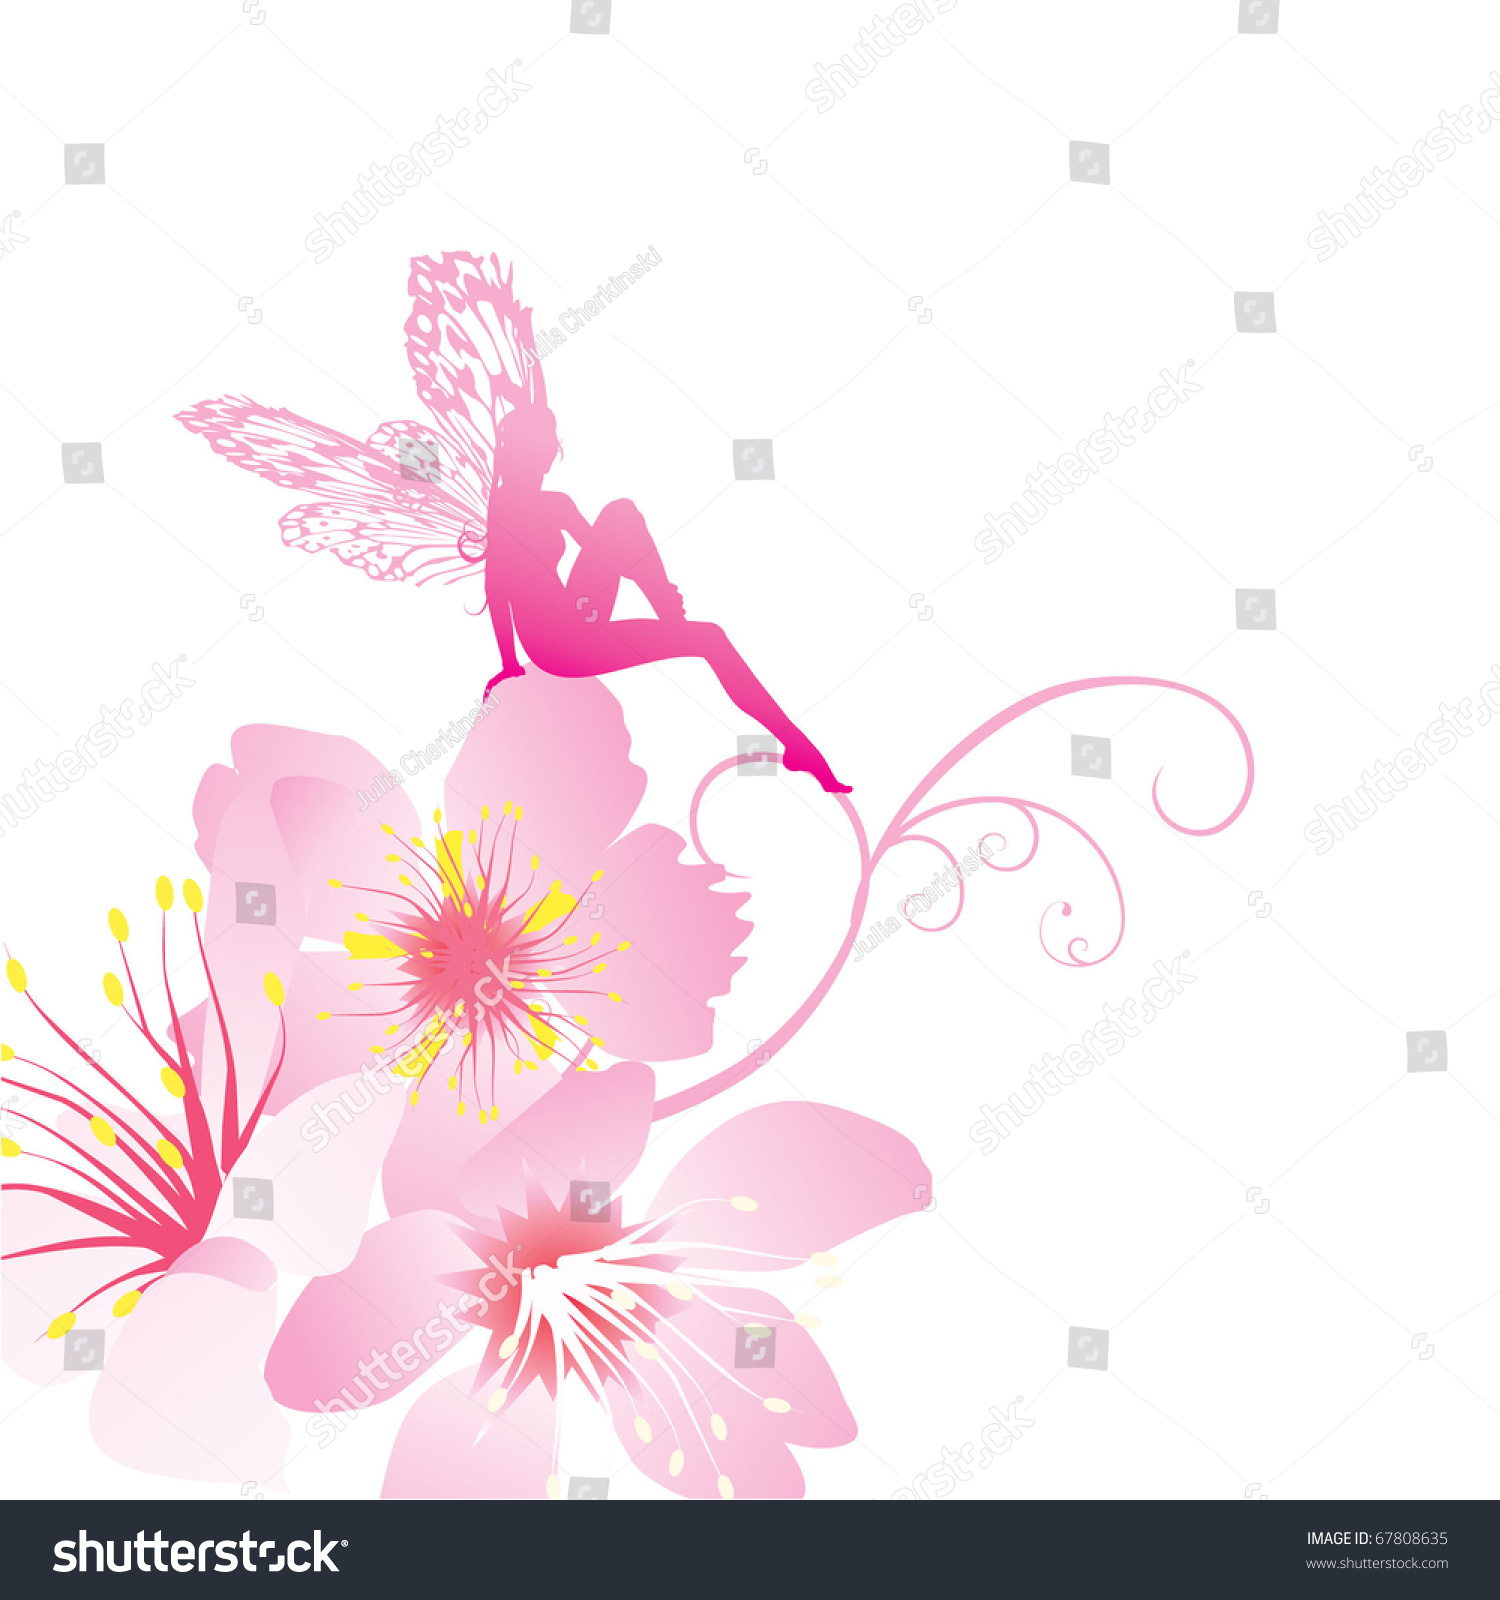 Pink Fairy On The Flowers Vector - 67808635 : Shutterstock